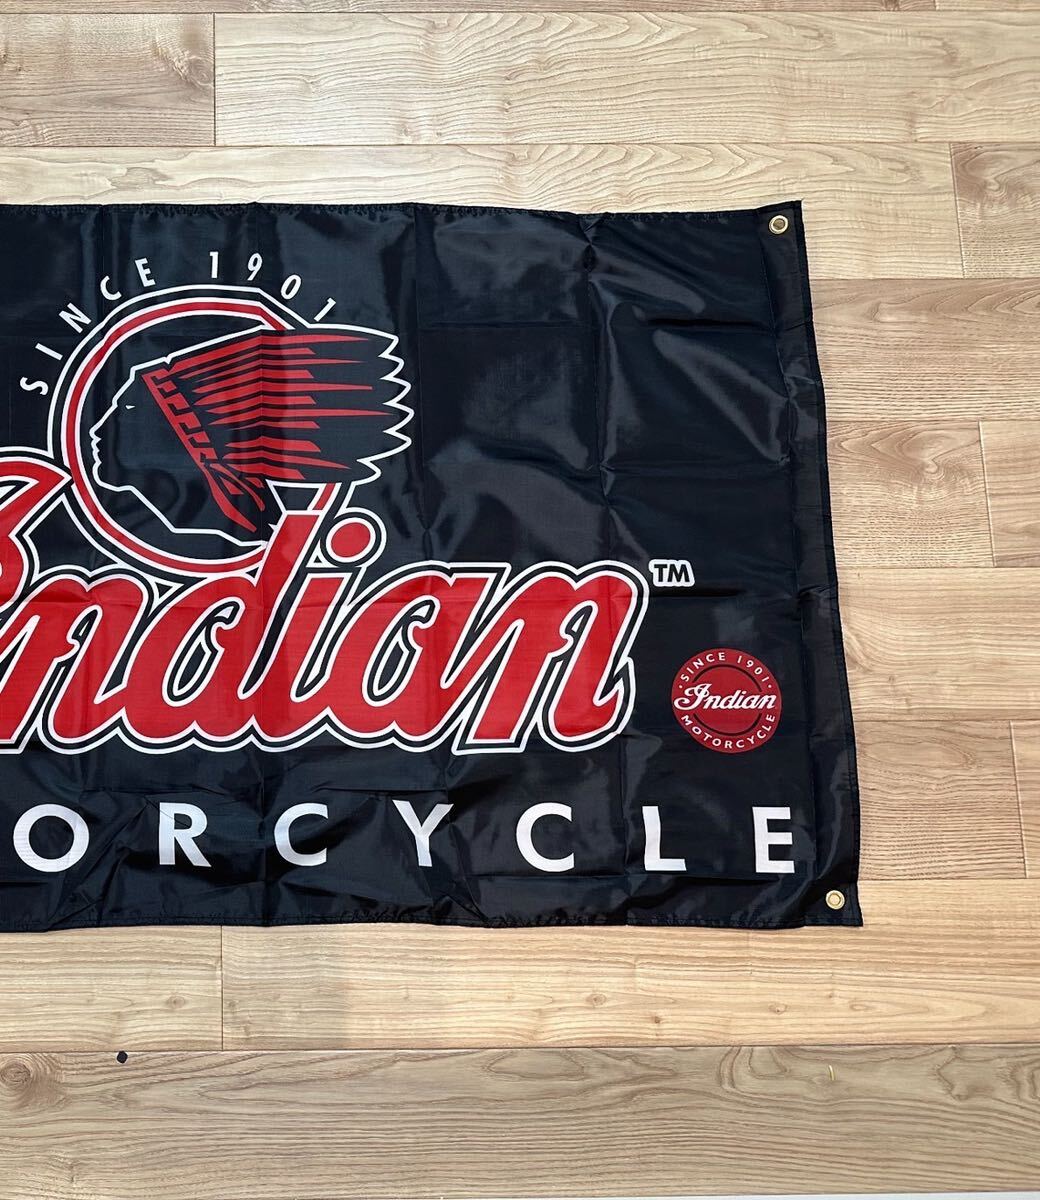  approximately 150x90cm Indian Motorcycle extra-large flag banner tapestry flag garage equipment ornament american Harley hot rod bike 